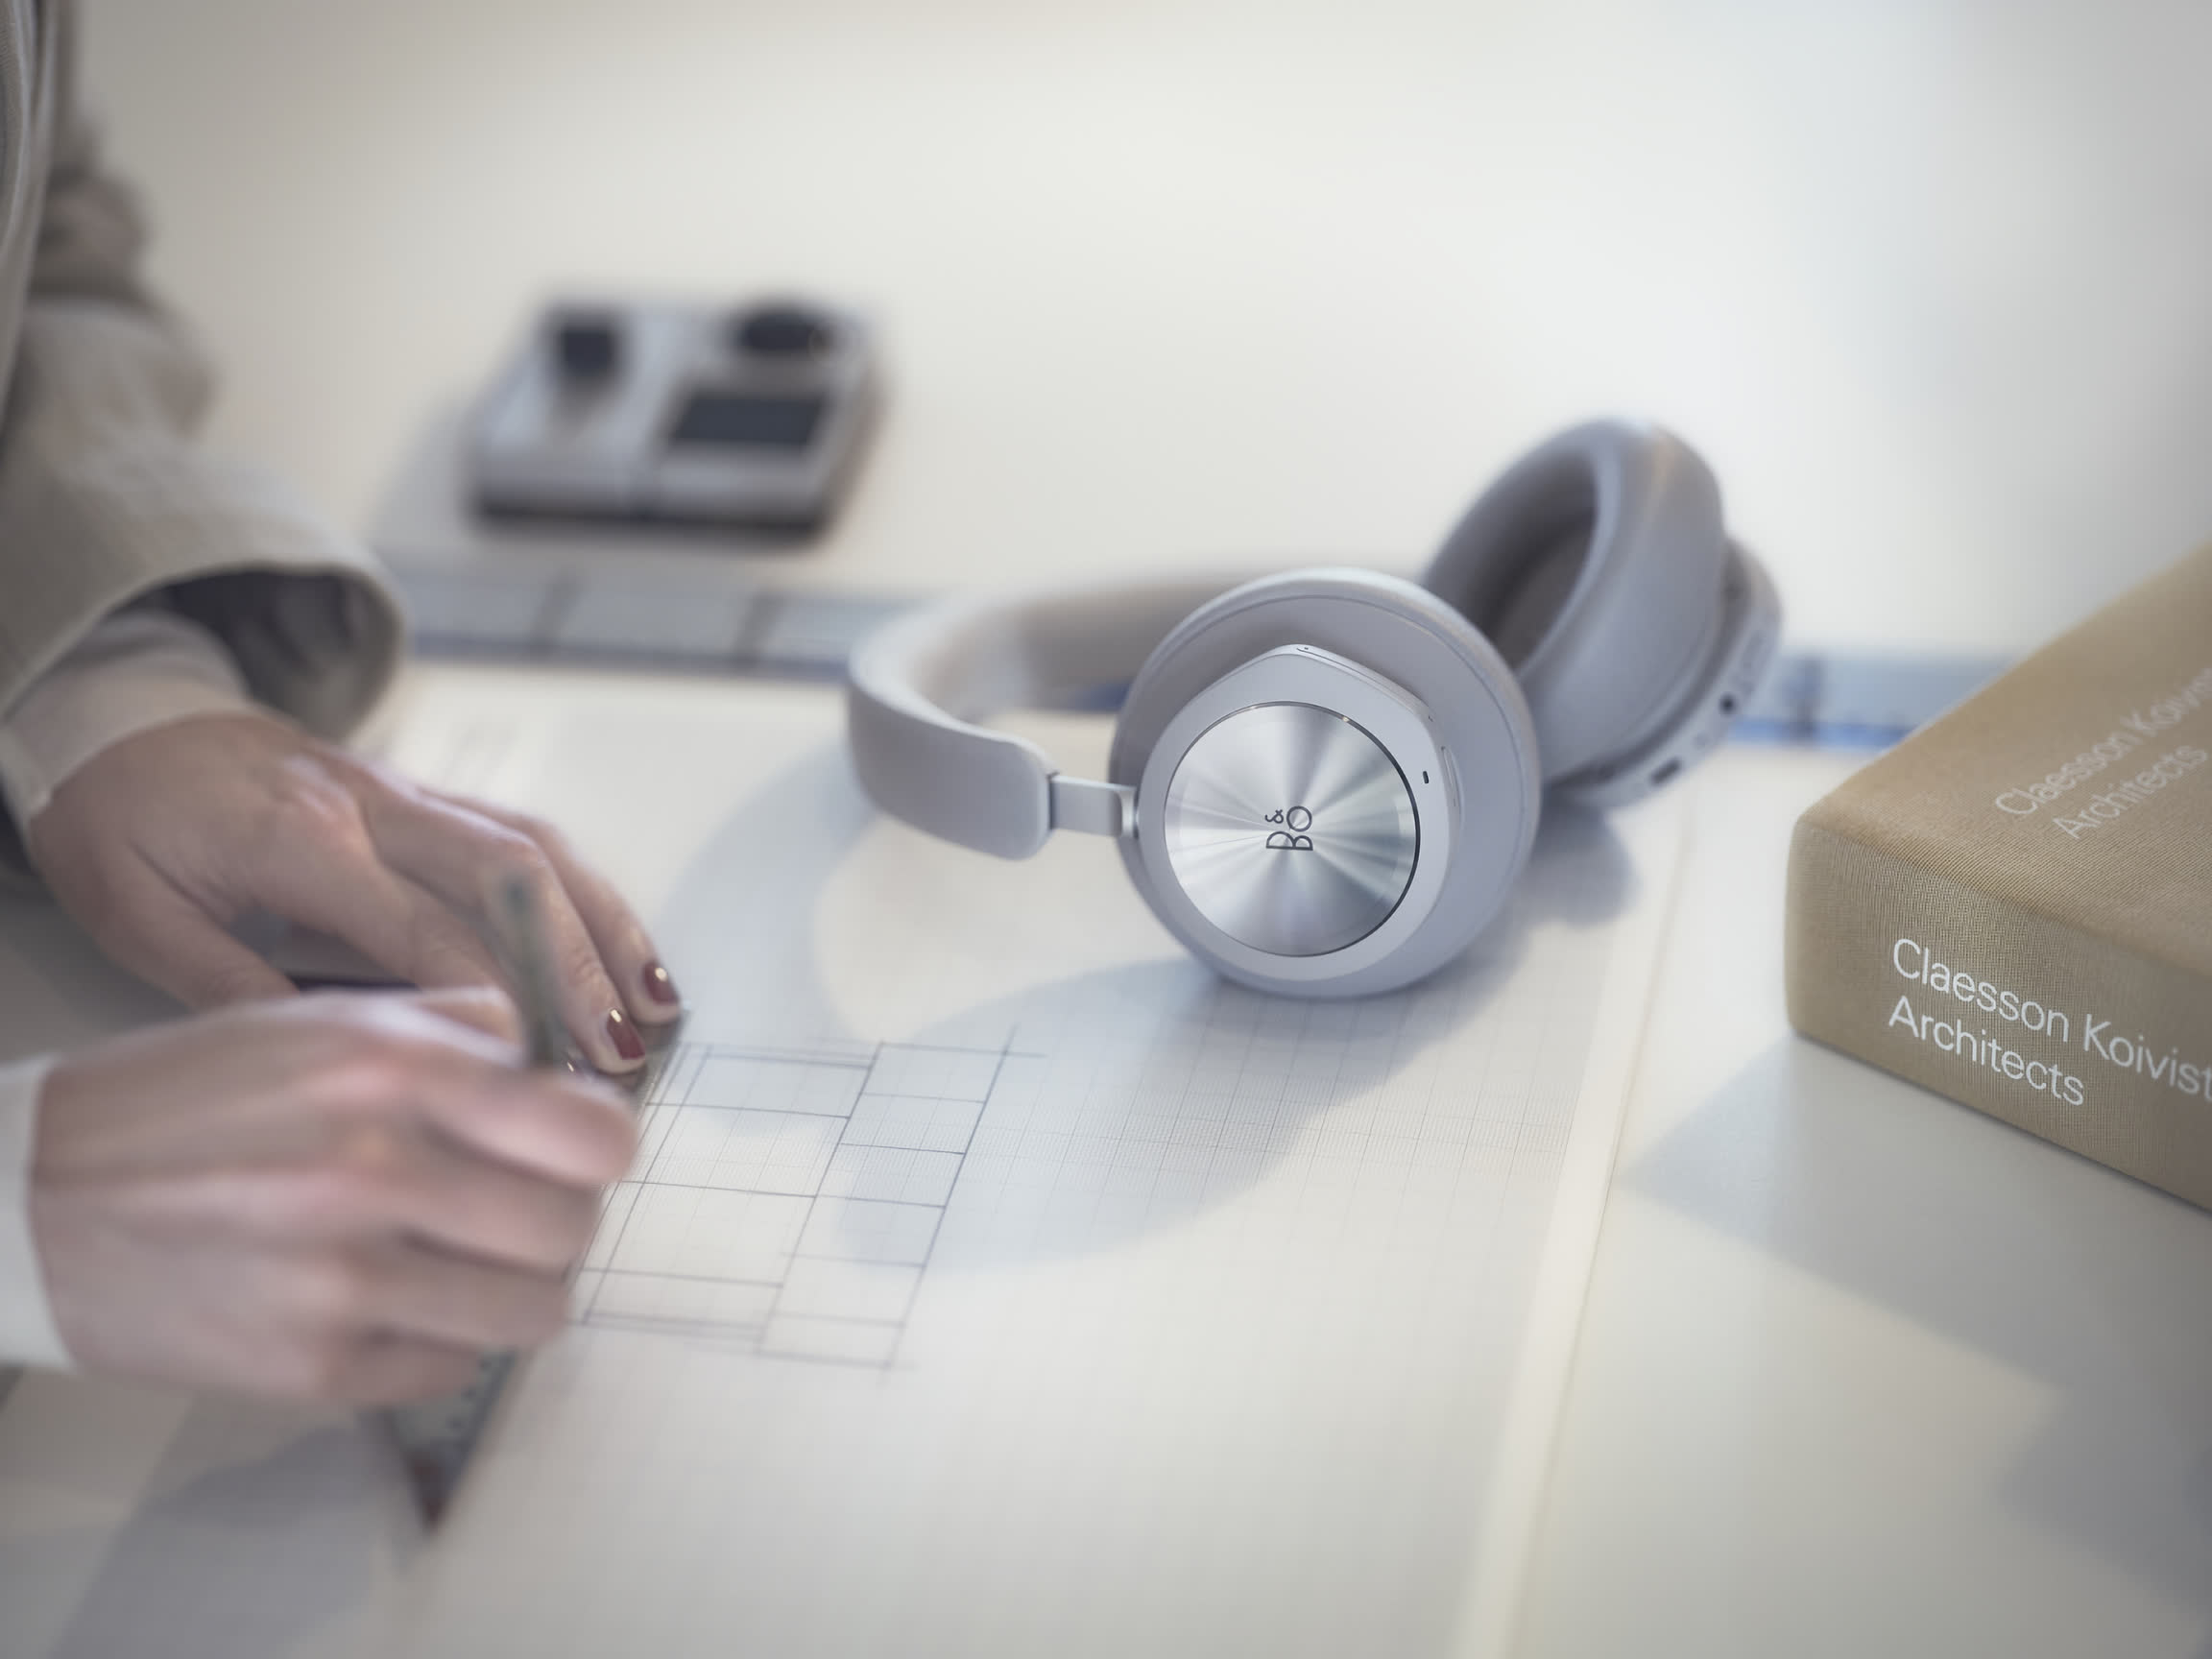 Bang & Olufsen launches new Beoplay Portal gaming headset with PlayStation support